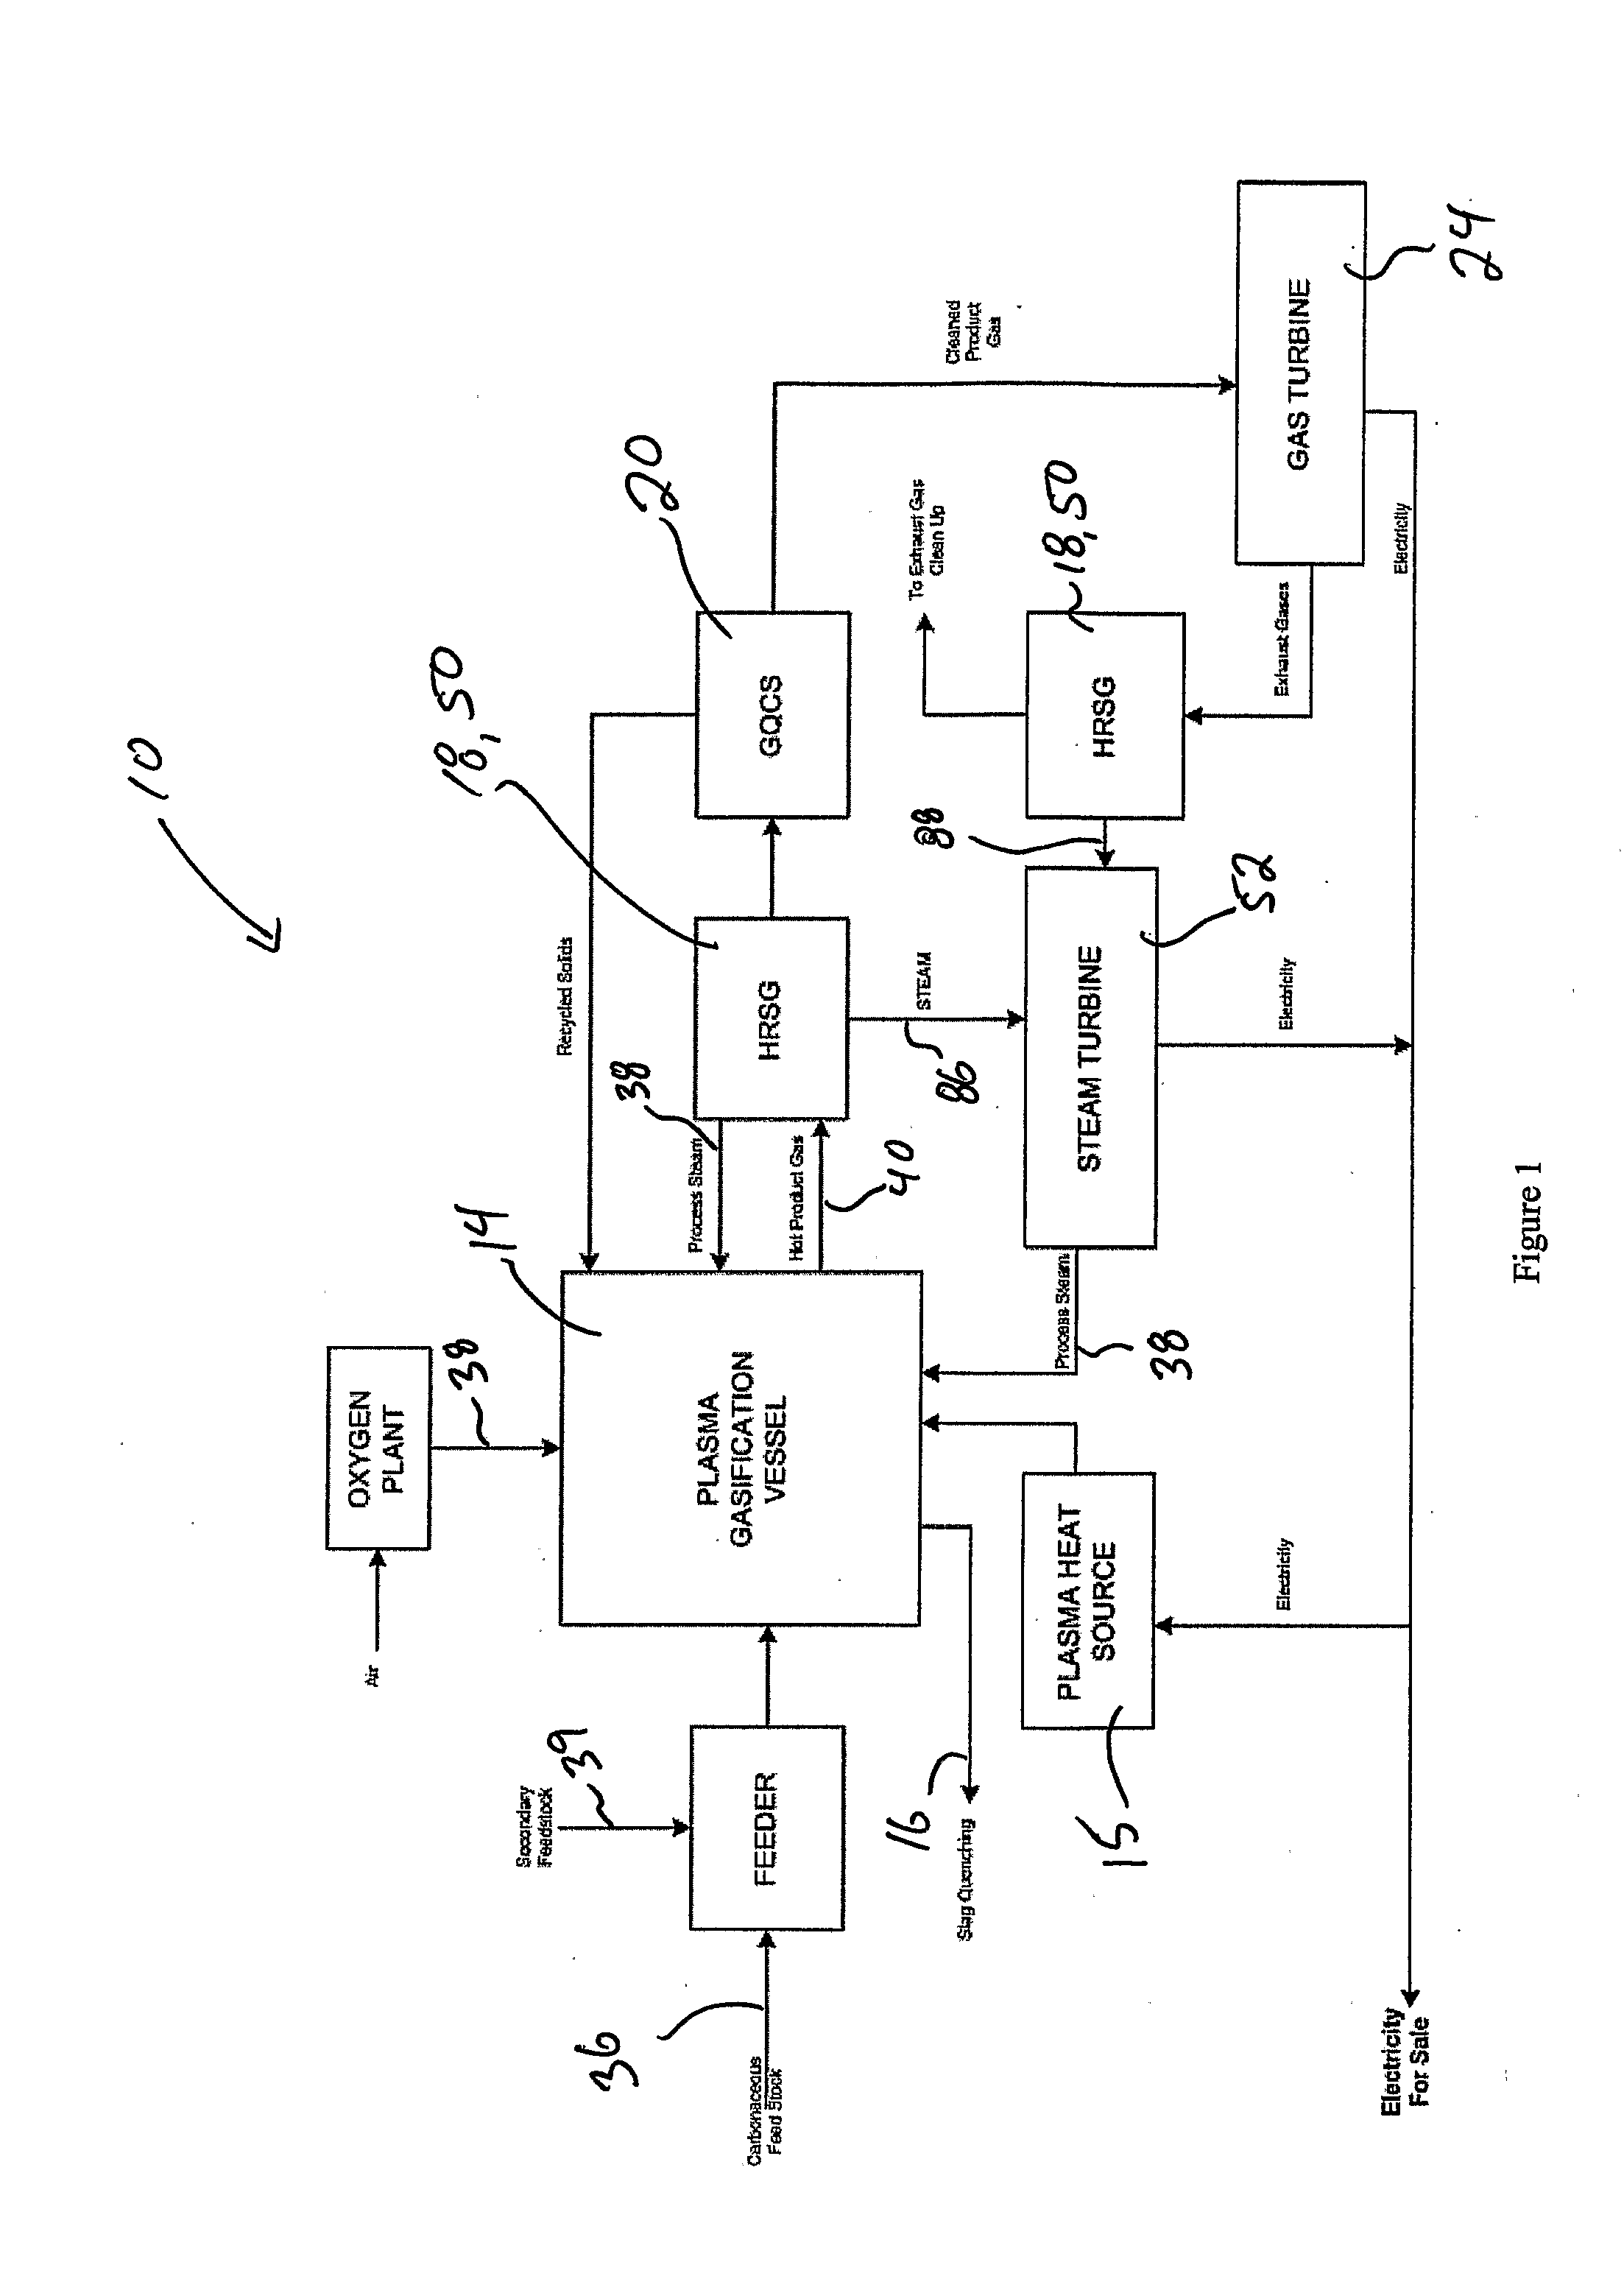 System For the Conversion of Carbonaceous Fbedstocks to a Gas of a Specified Composition